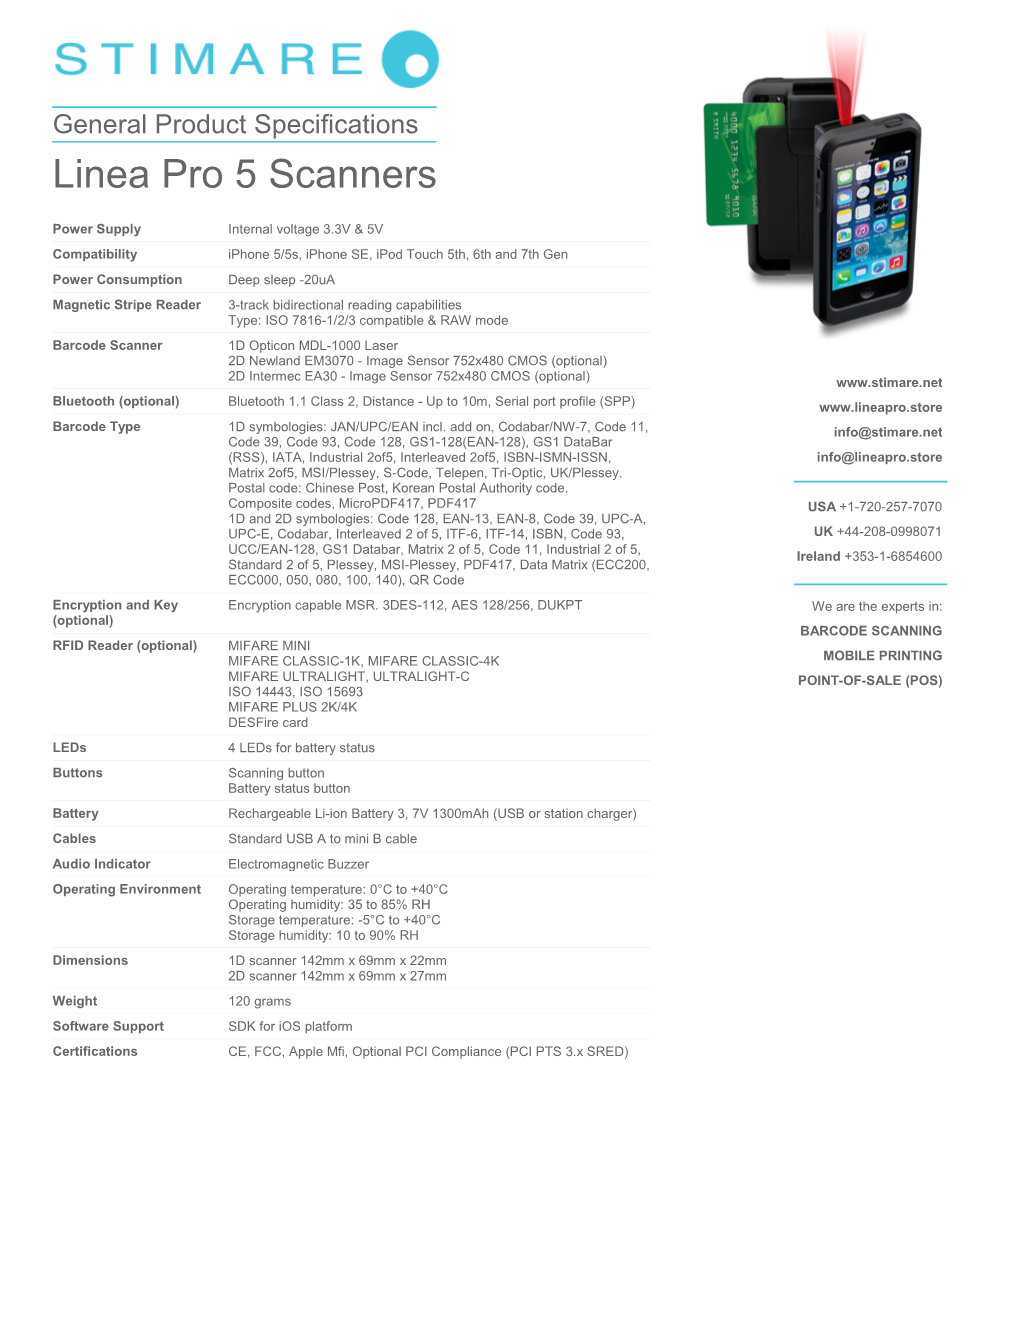 General Product Specifications Linea Pro 5 Scanners